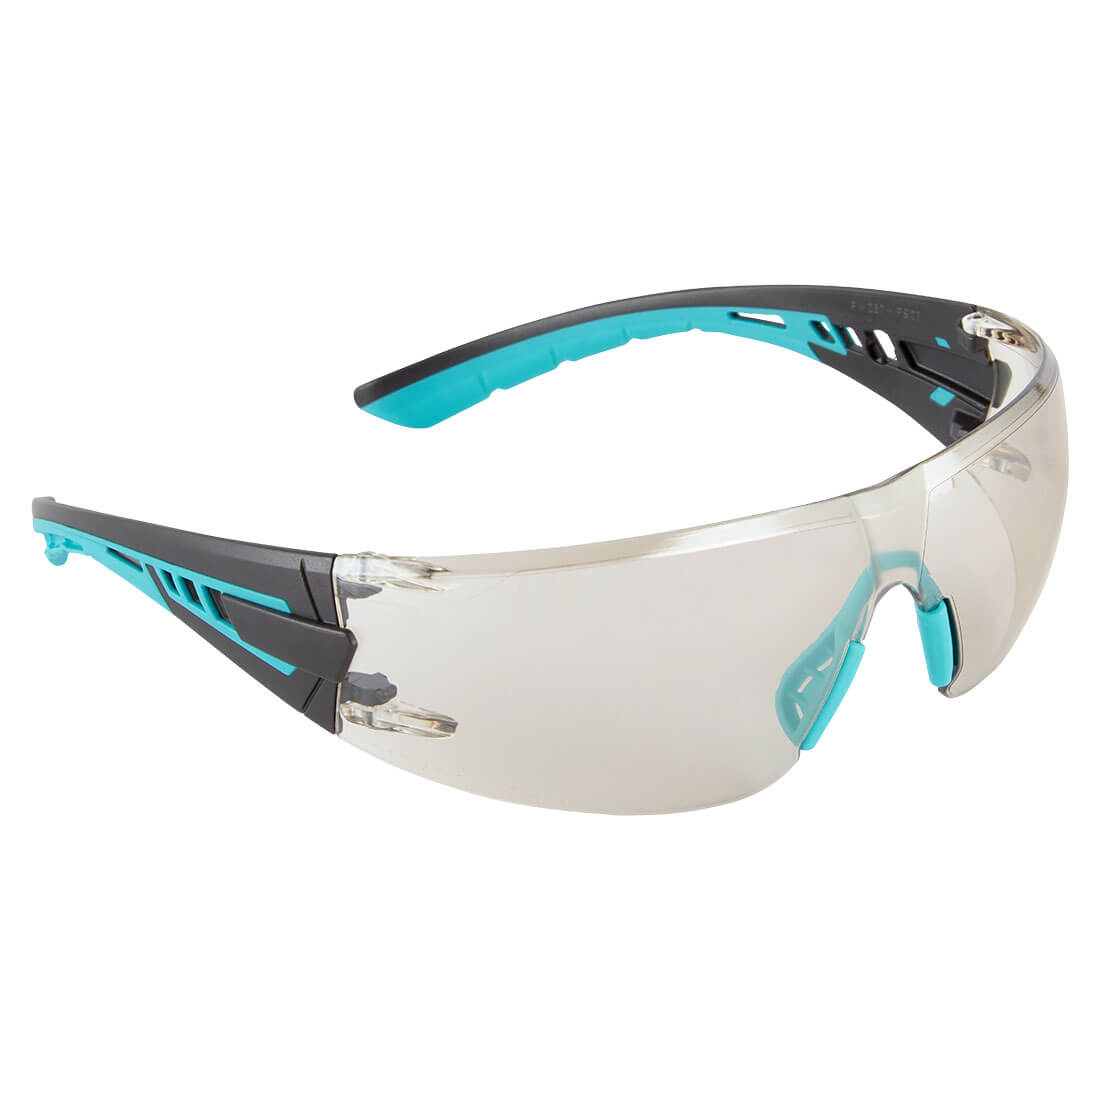 PS27 - Tech Look Lite KN Safety Glasses